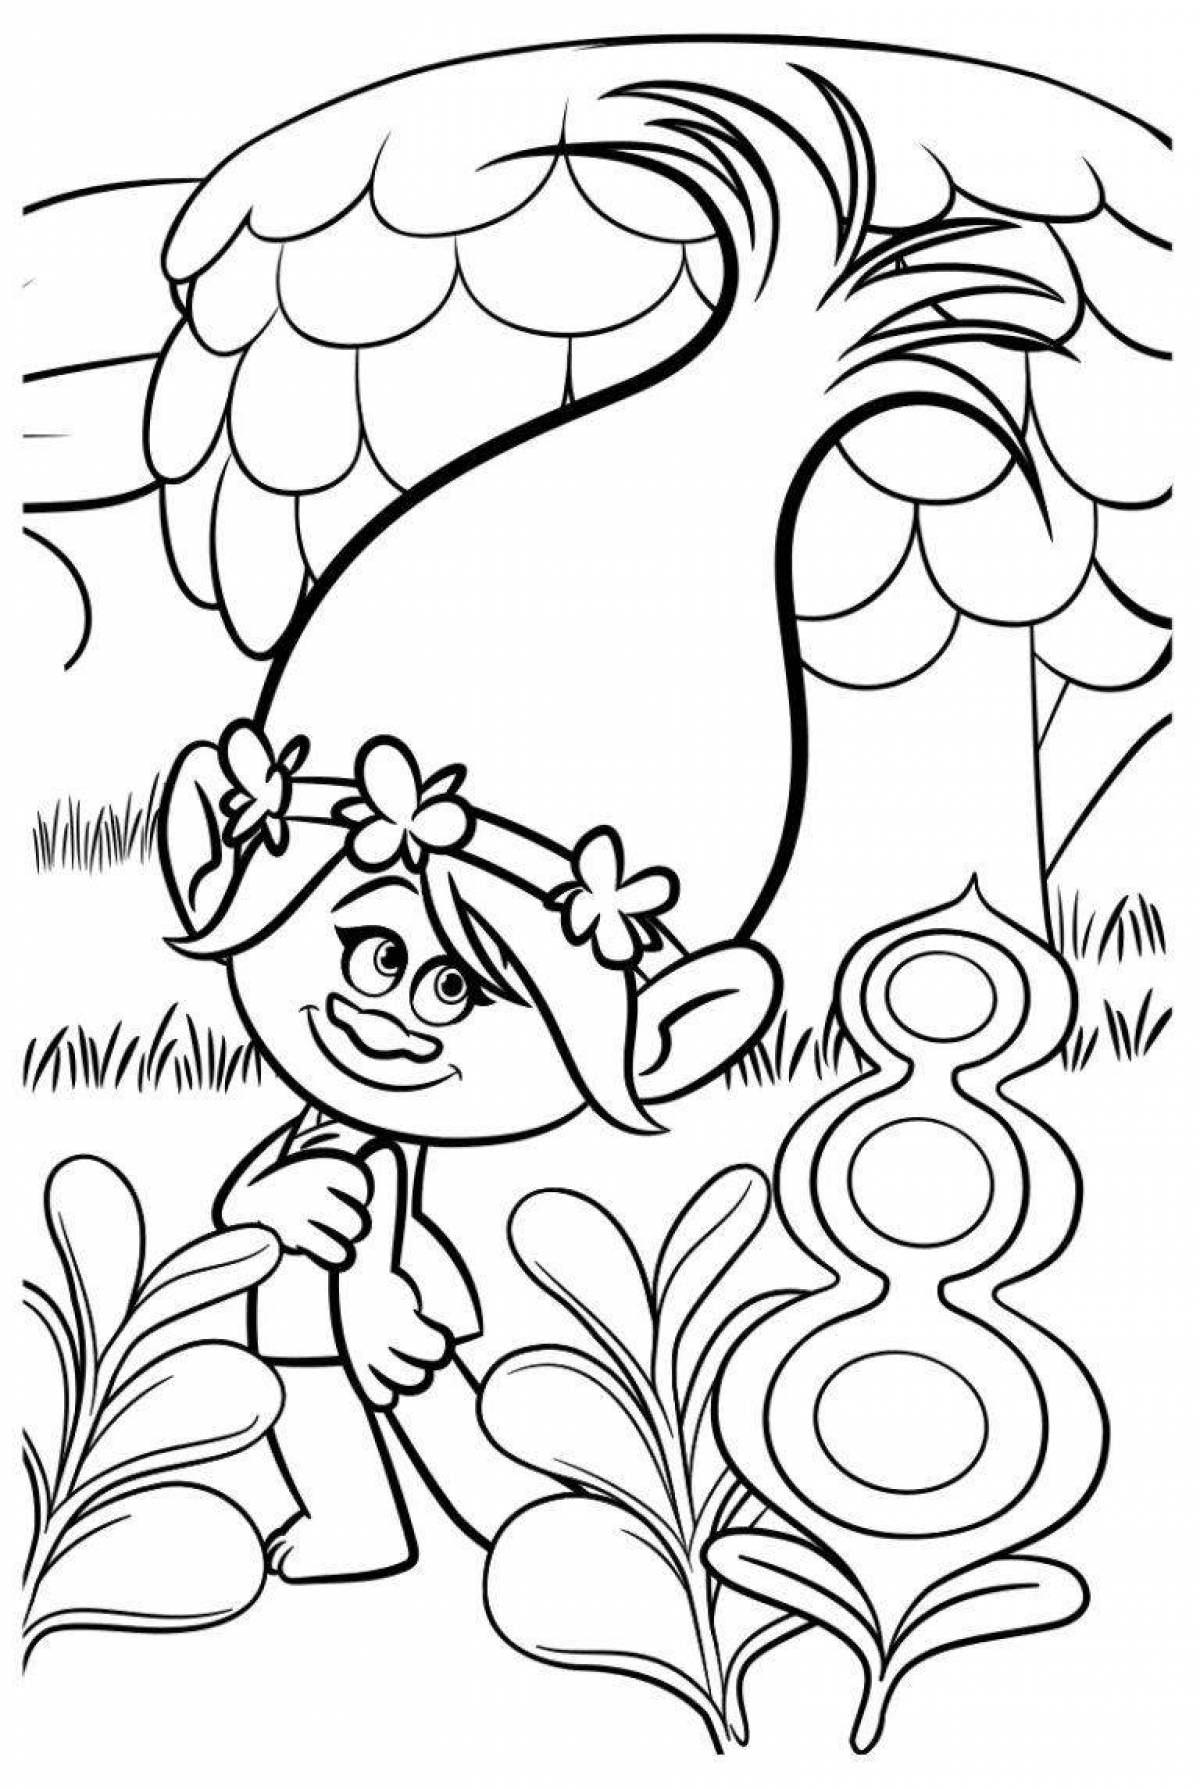 Fairytale coloring book for troll girls